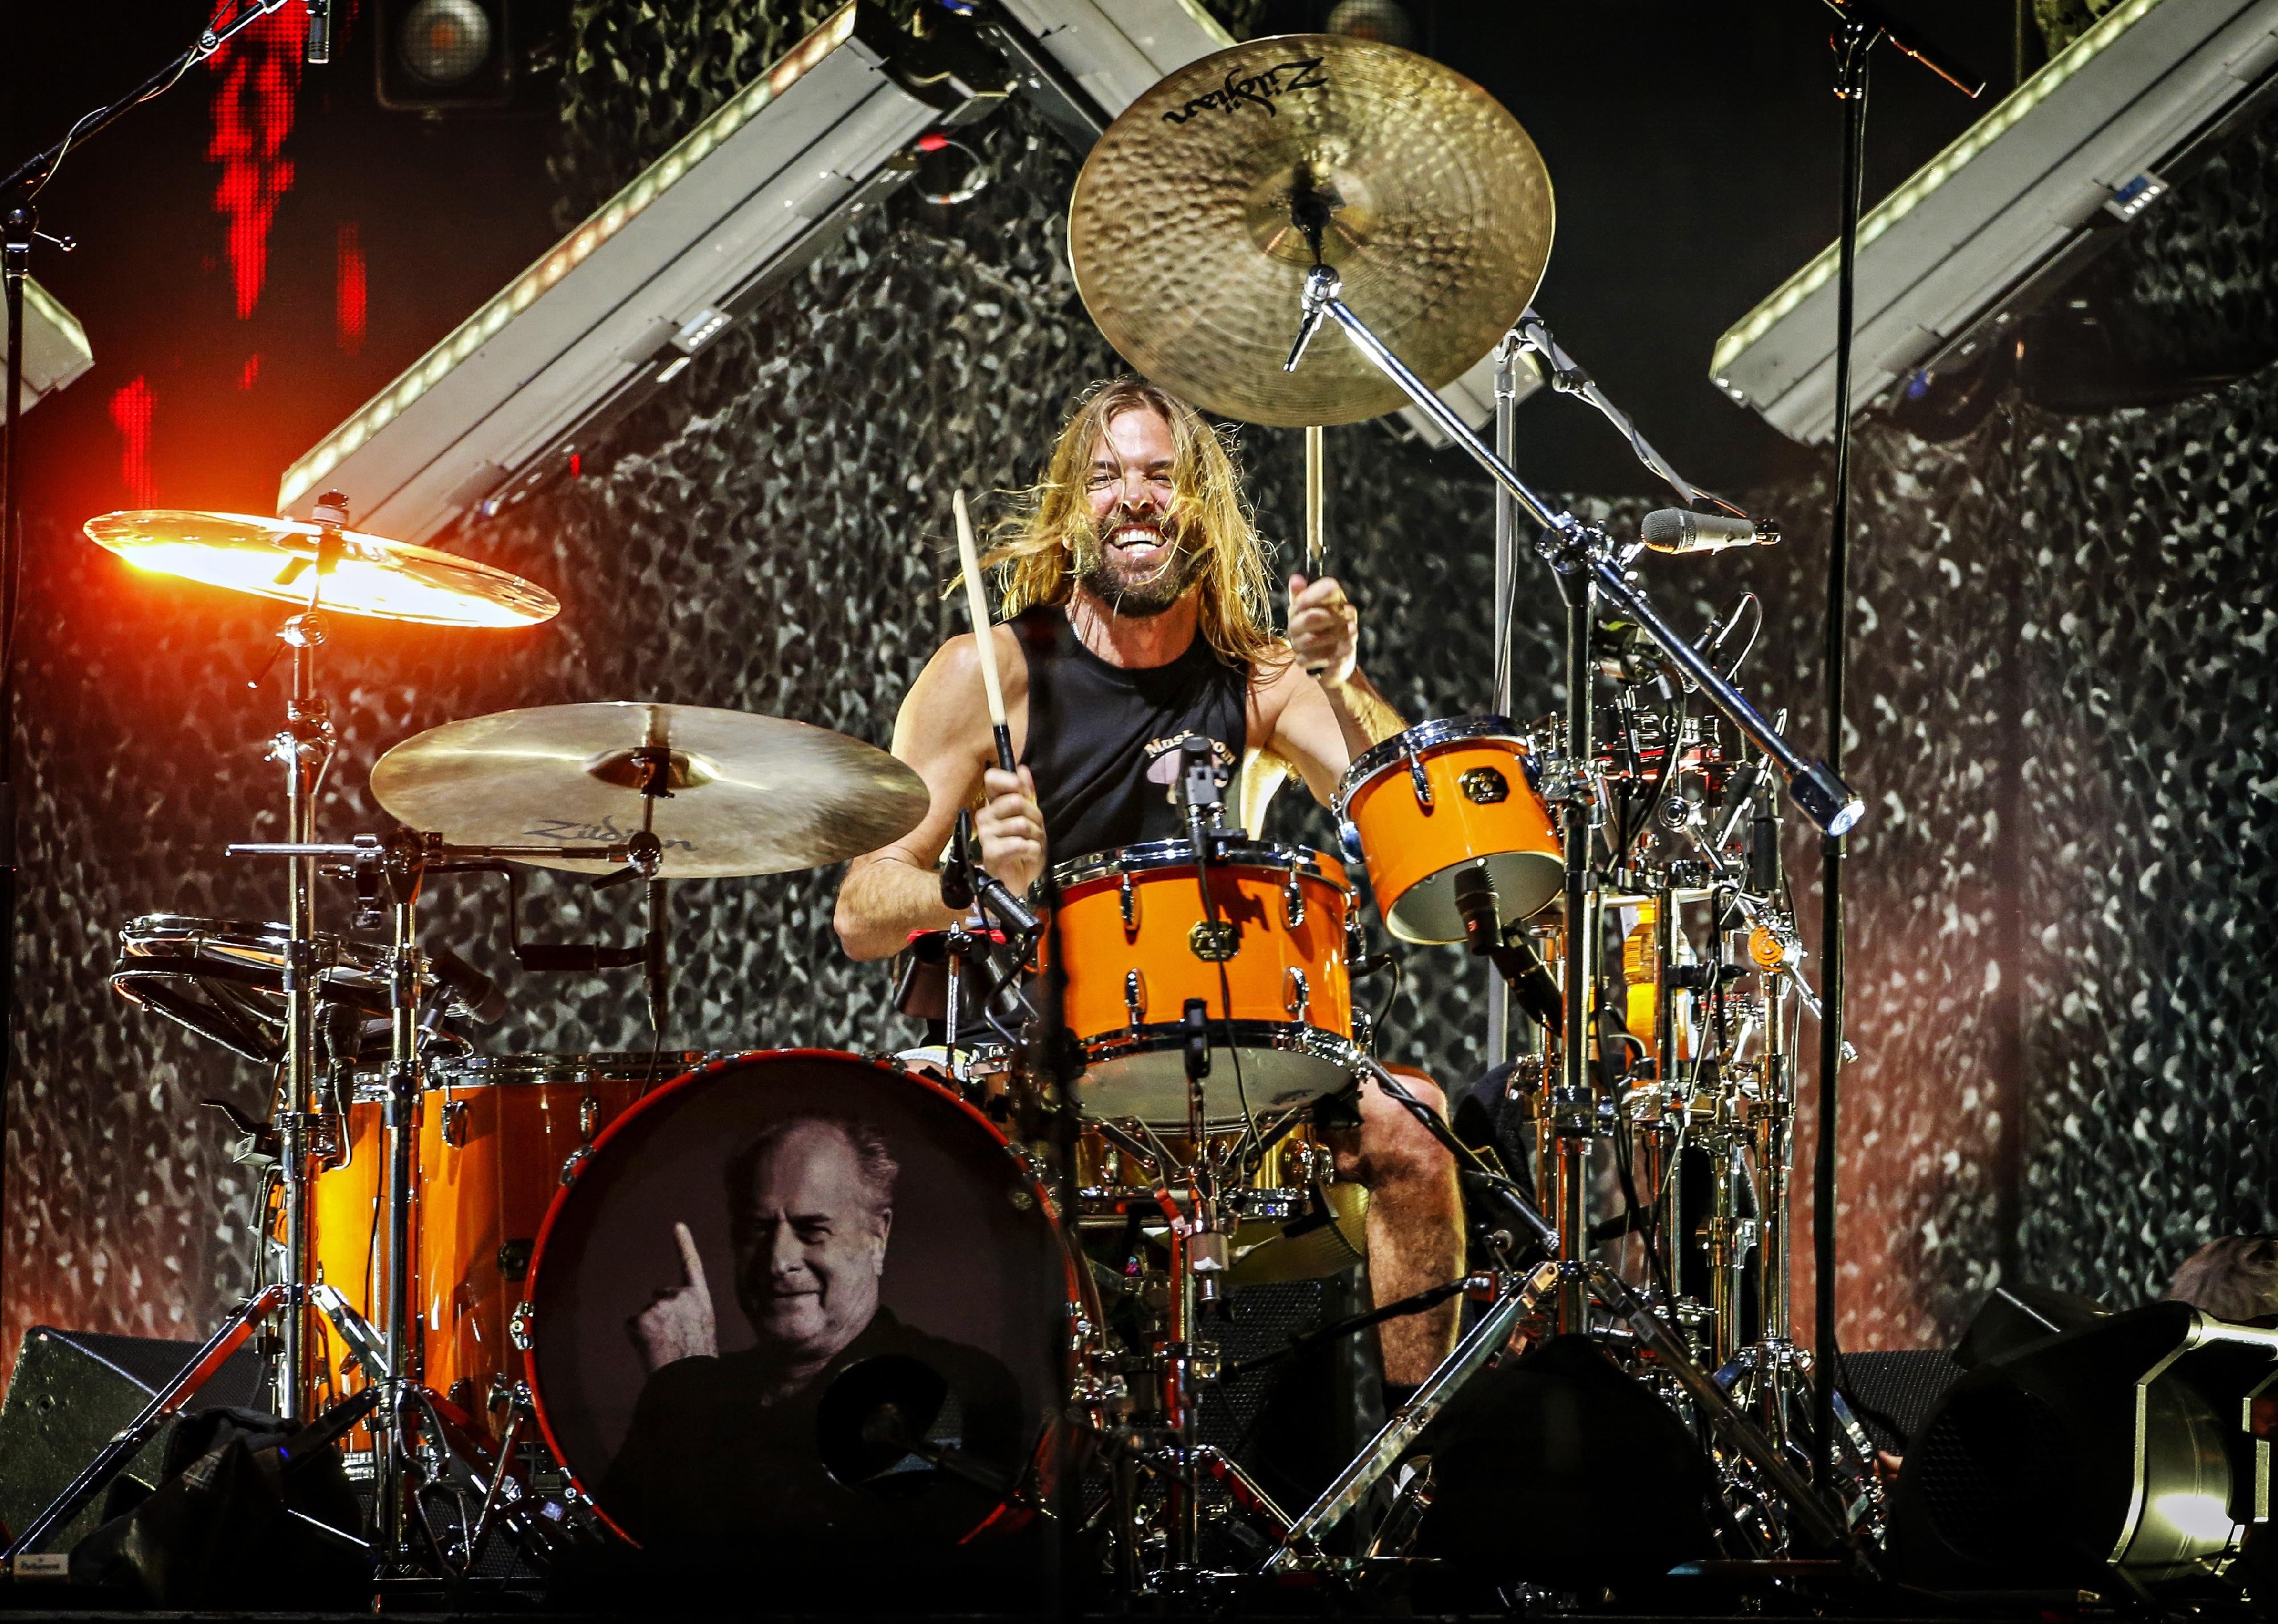 Taylor Hawkins of the Foo Fighters performs on stage in March 2022.